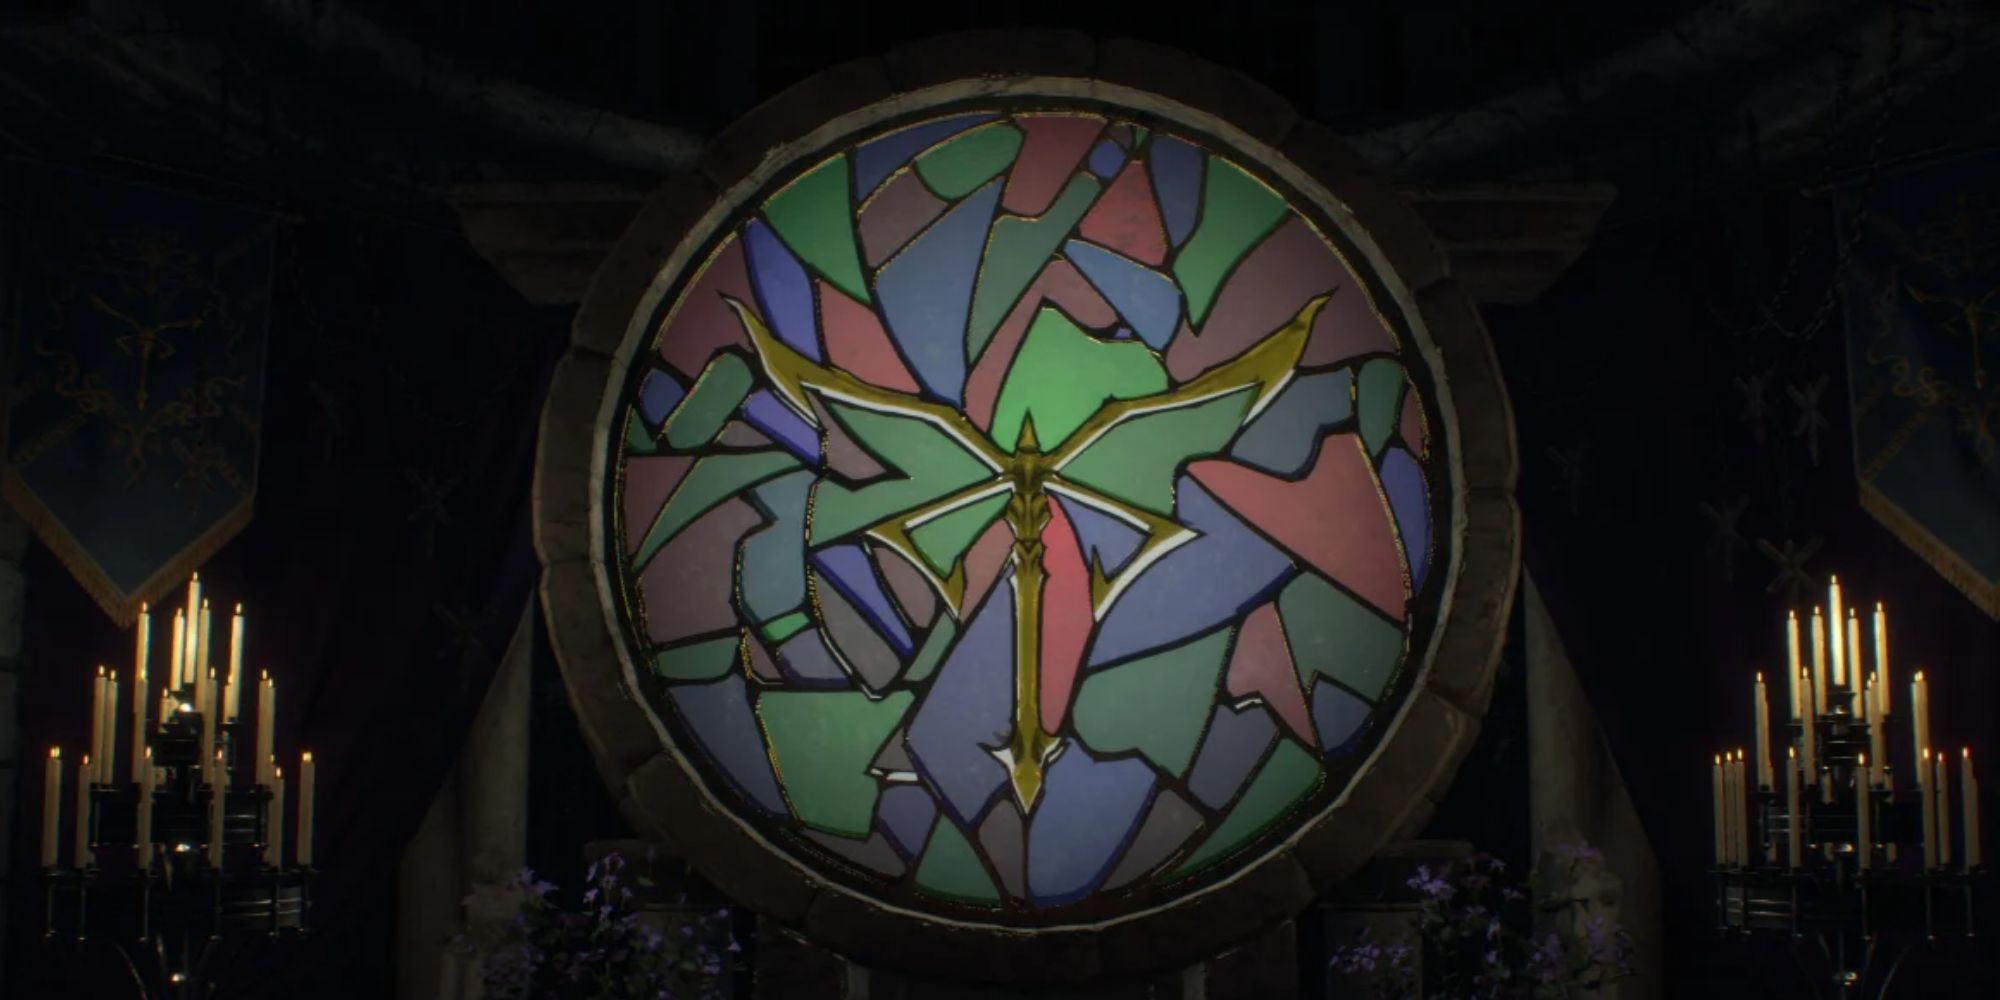 The church puzzle from Resident Evil 4 Remake.